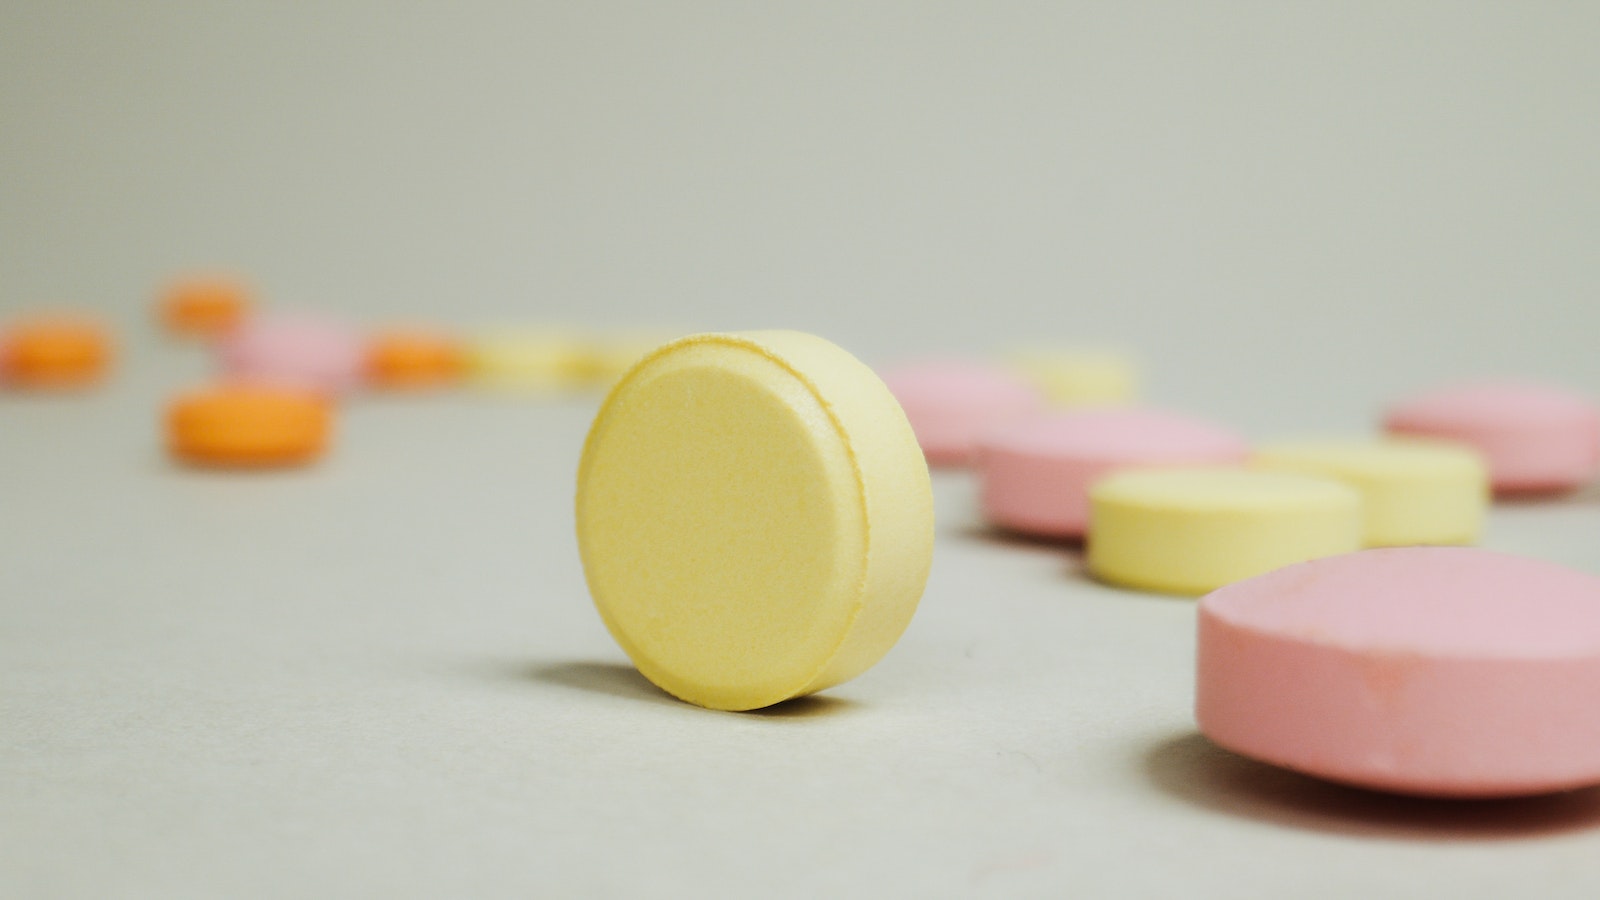 Colorful Round Pills on White Surface